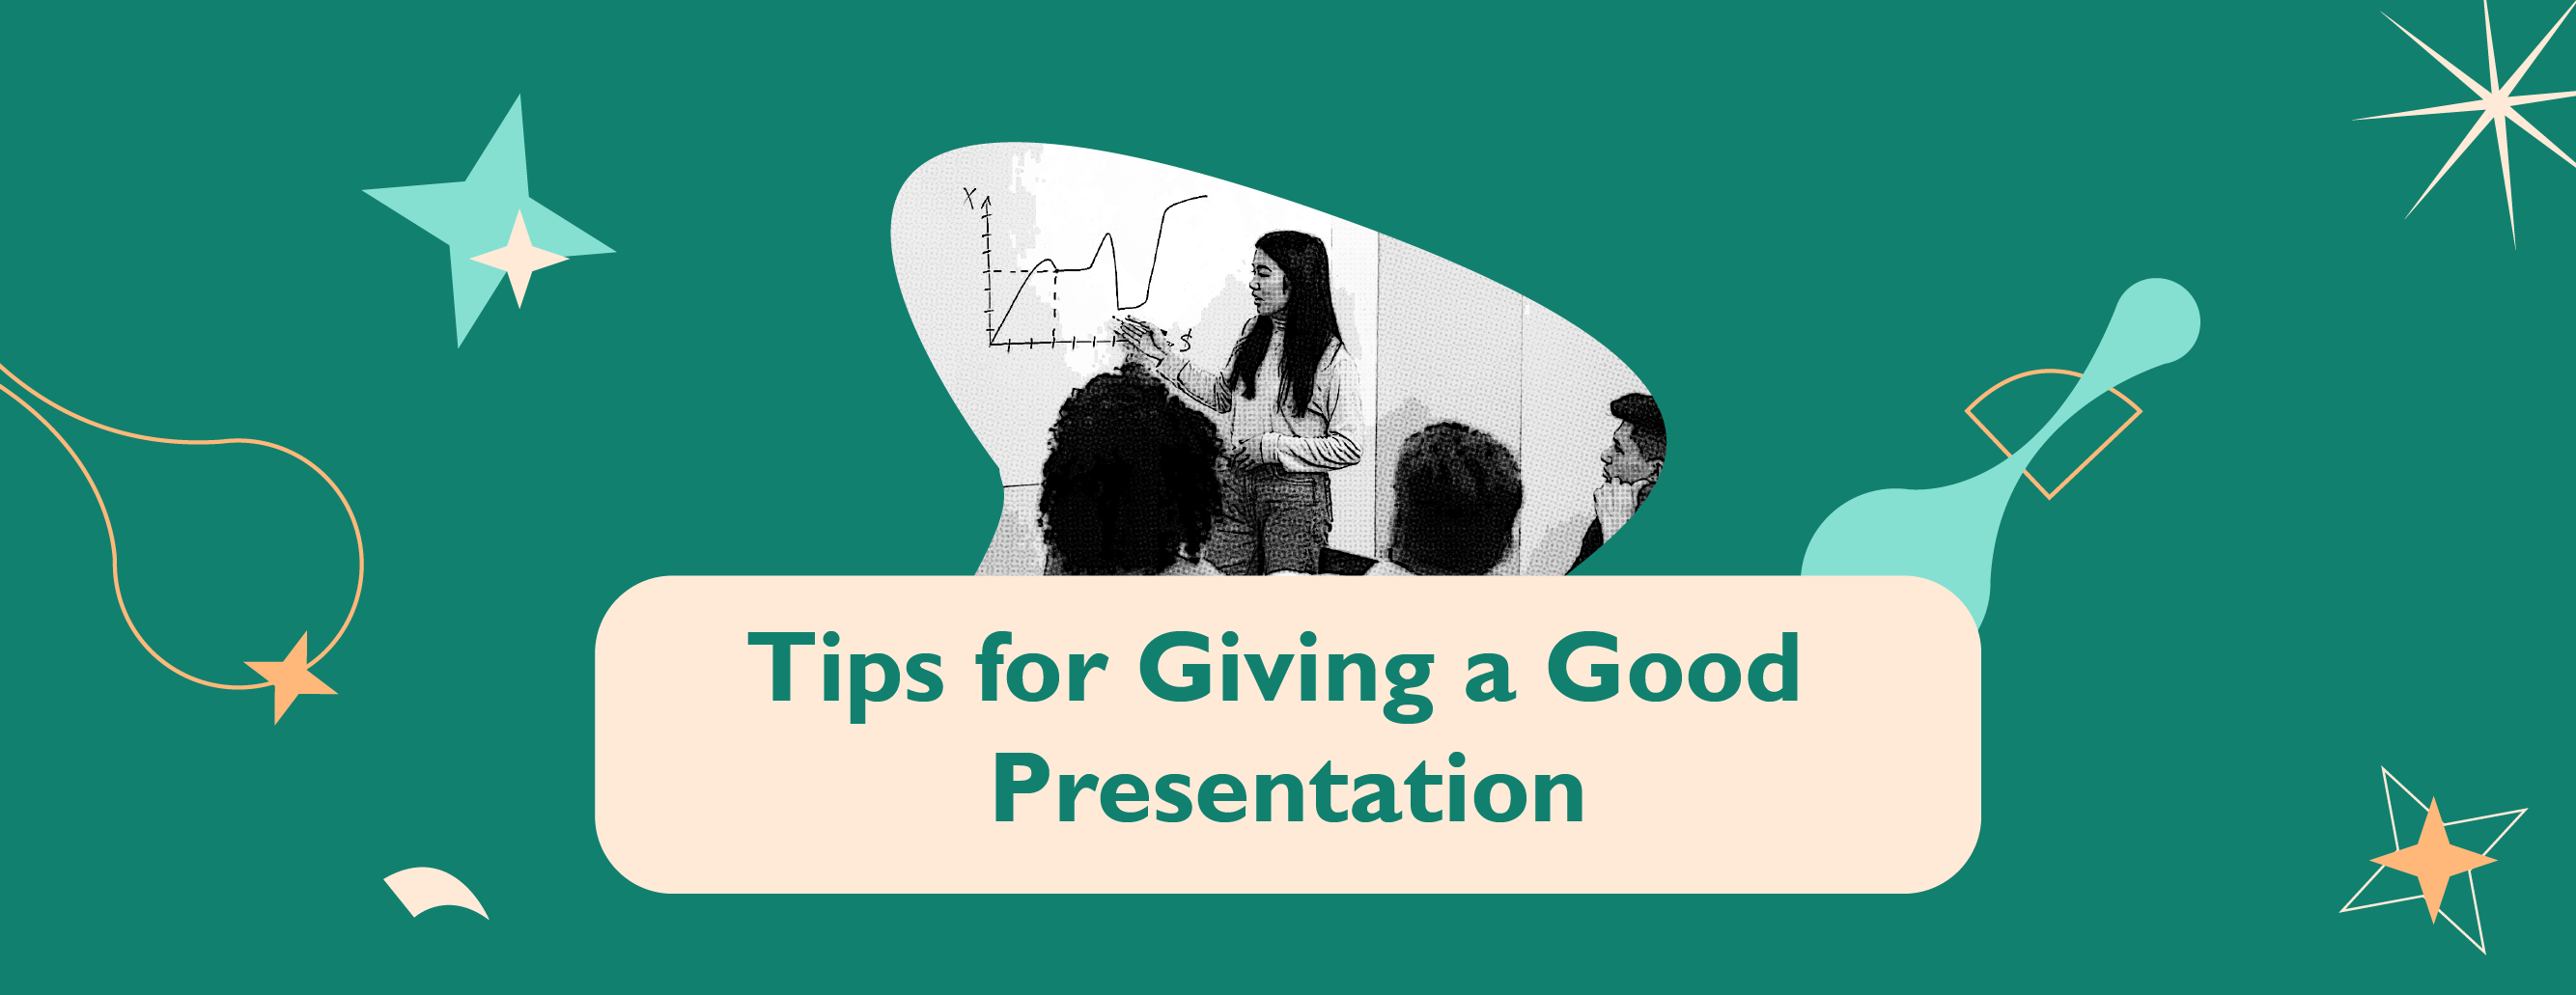 Articles - TIPS FOR GIVING A GOOD PRESENTATION